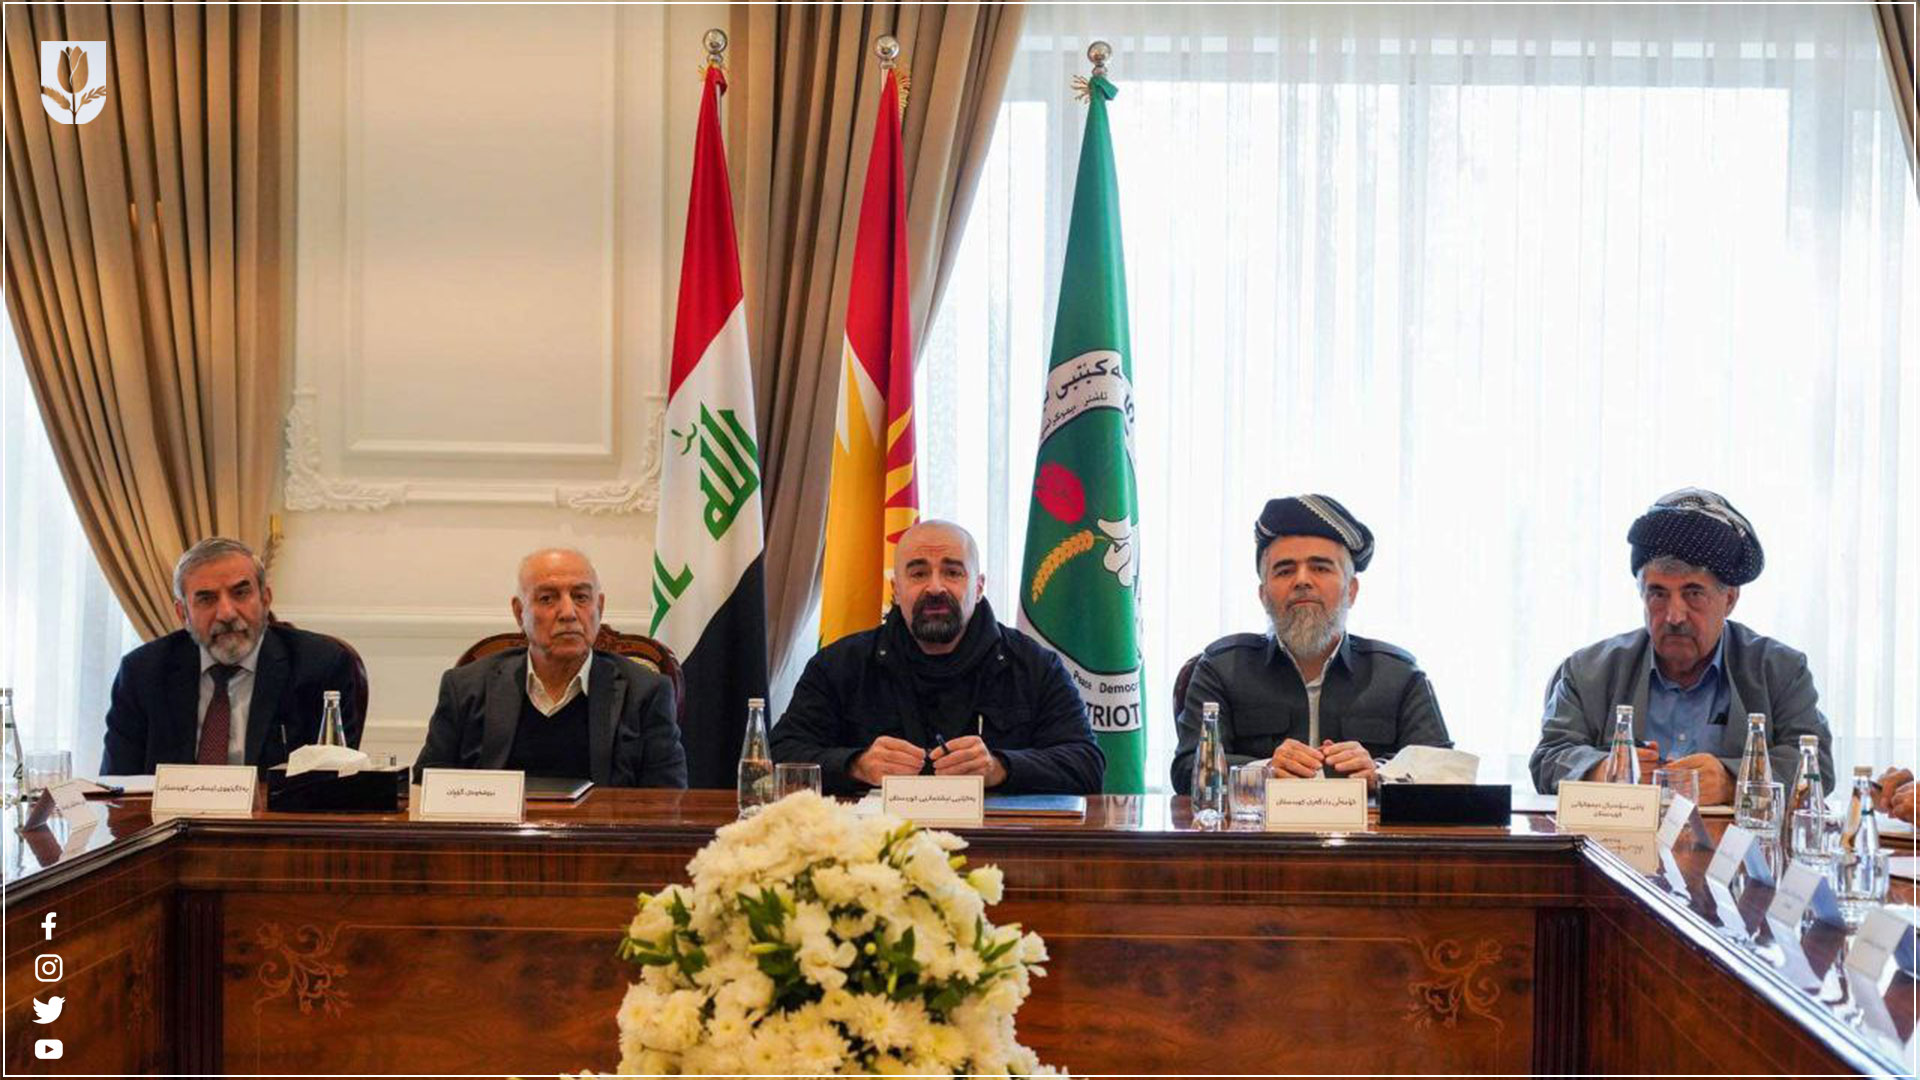  The leaders of five of the political parties in the Kurdistan Region